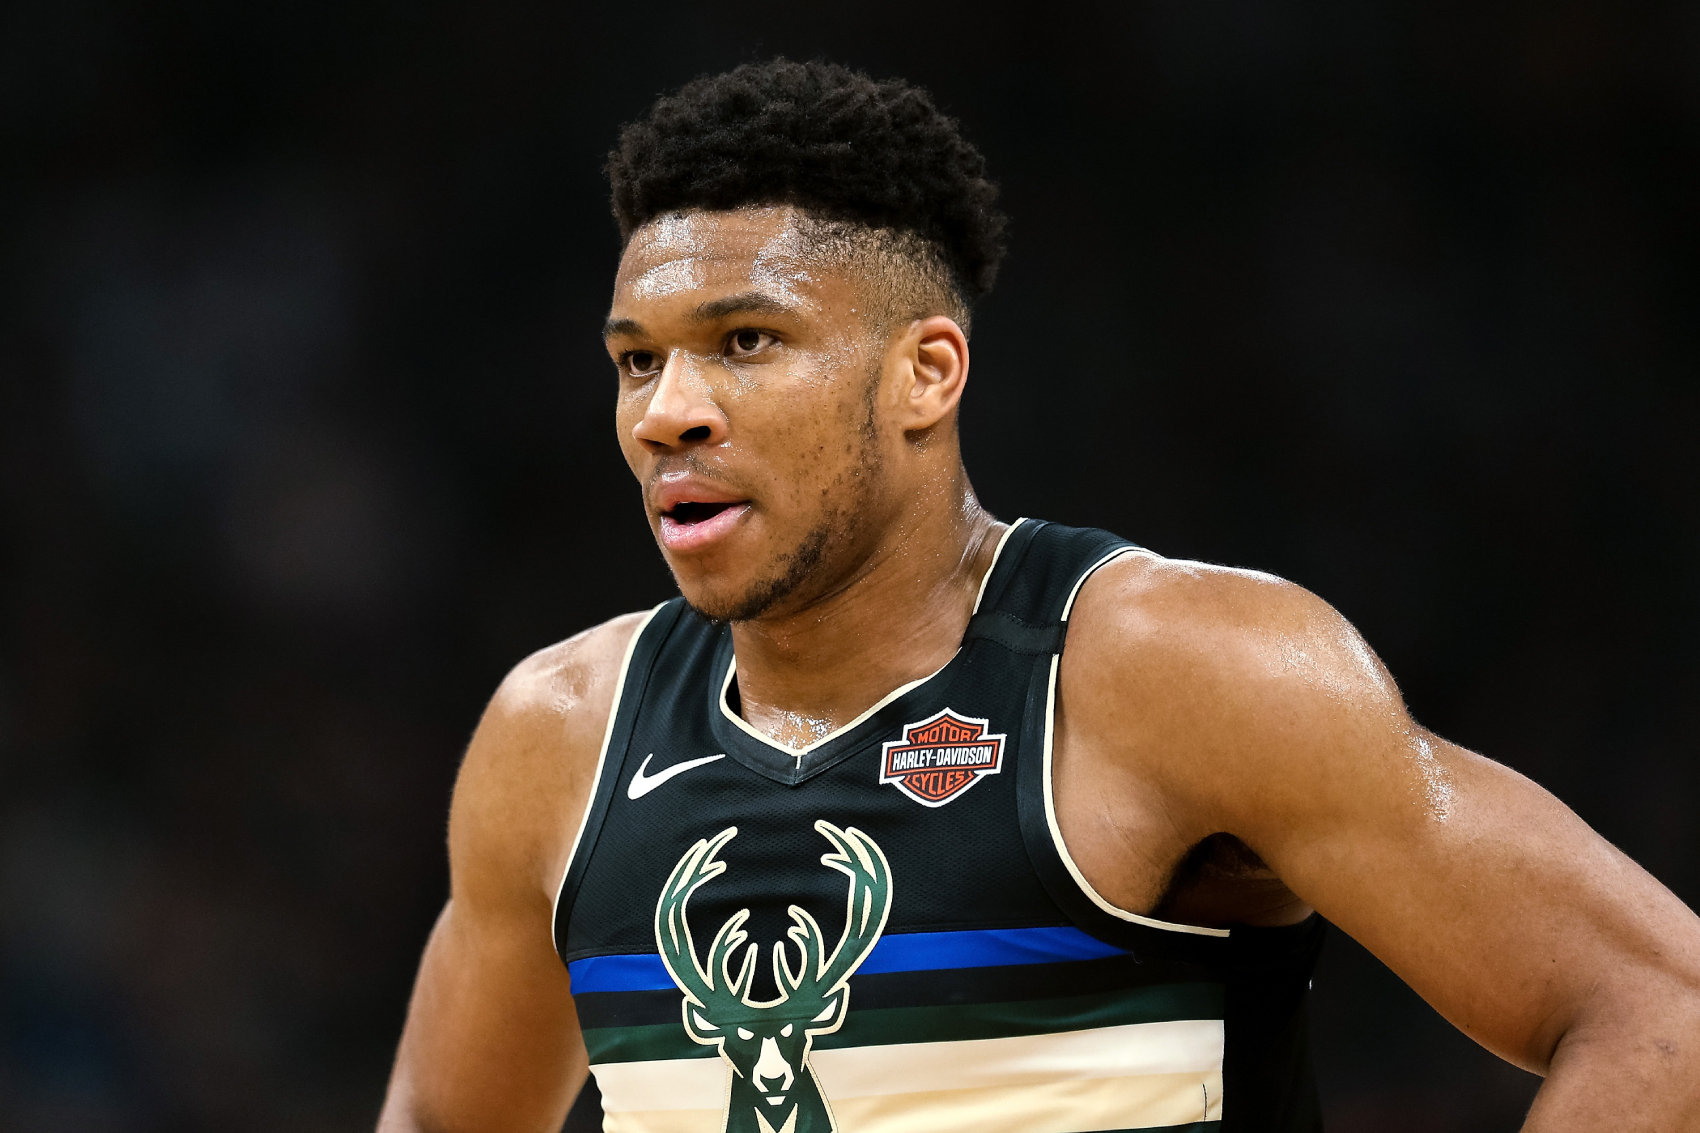 Giannis Antetokounmpo is one of the best players in the NBA for the Milwaukee Bucks. However, he almost ended up with the Toronto Raptors.